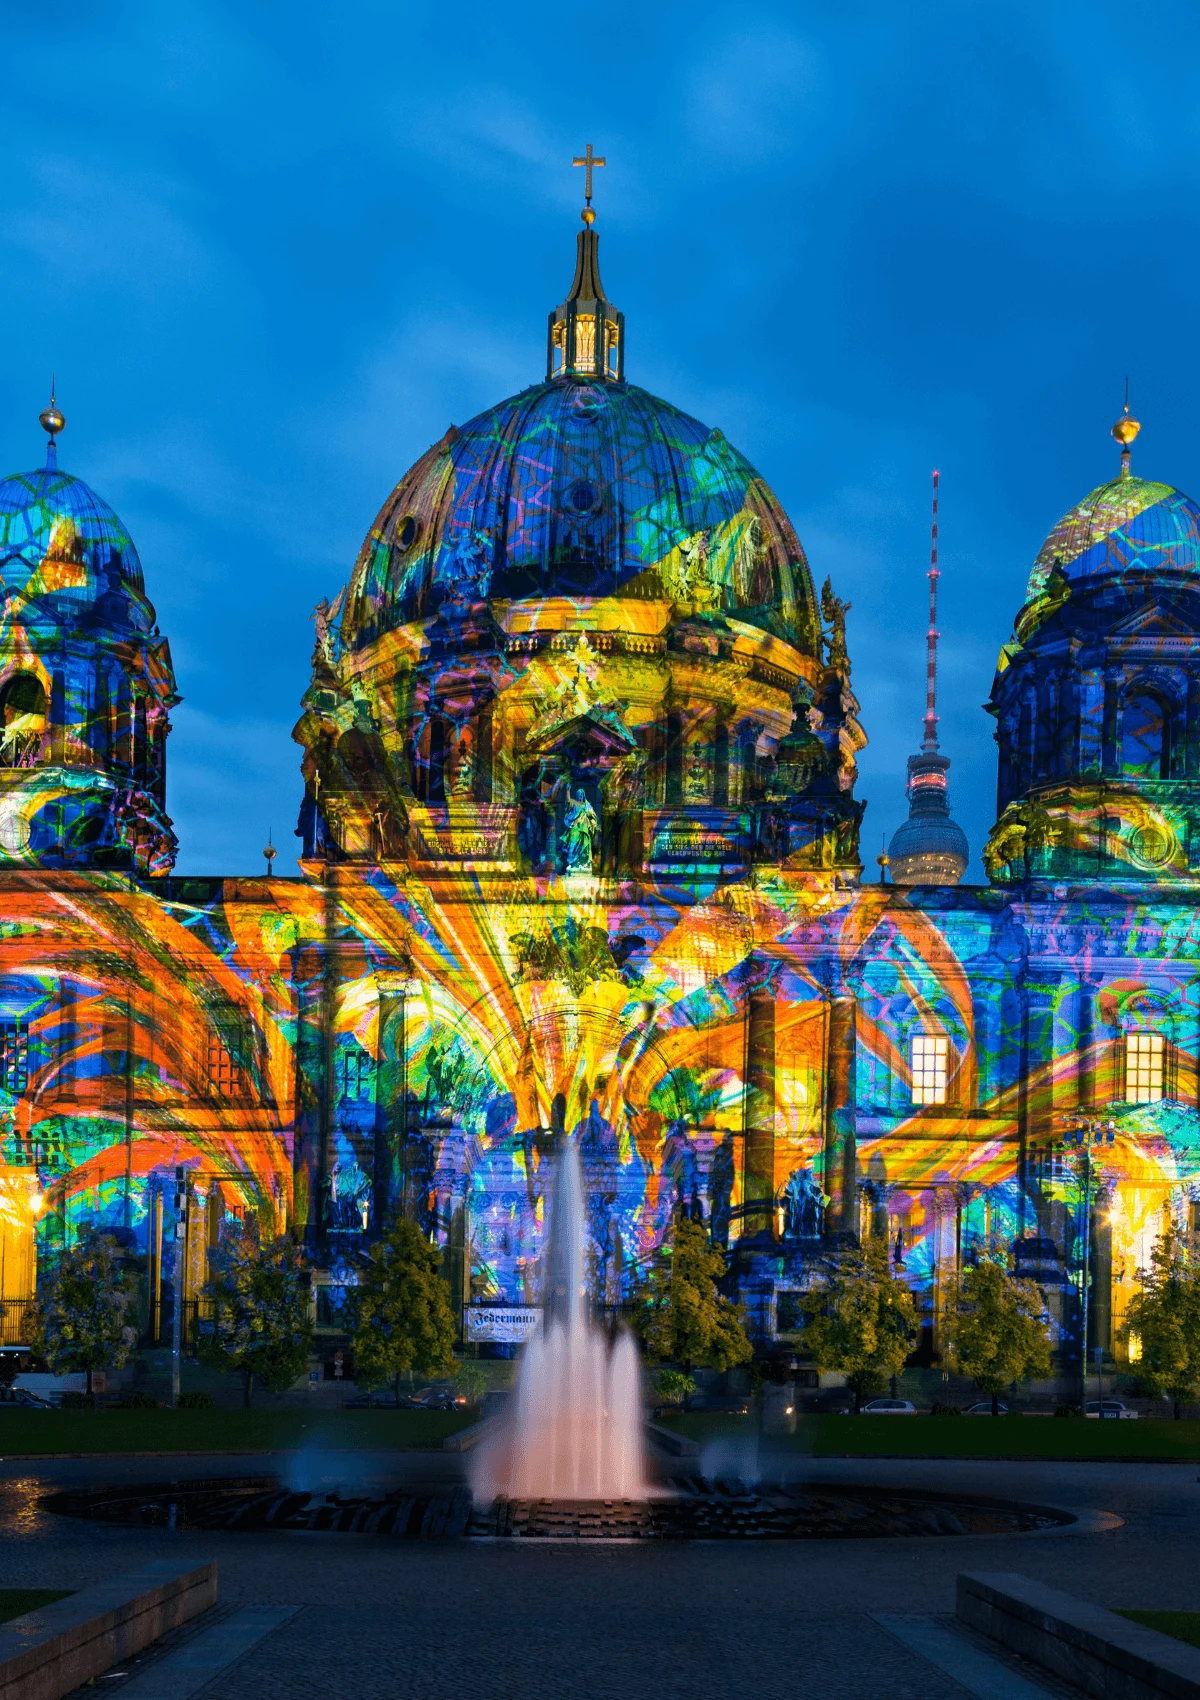 Berlin Festival of Lights takes over monuments in the capital of Germany.